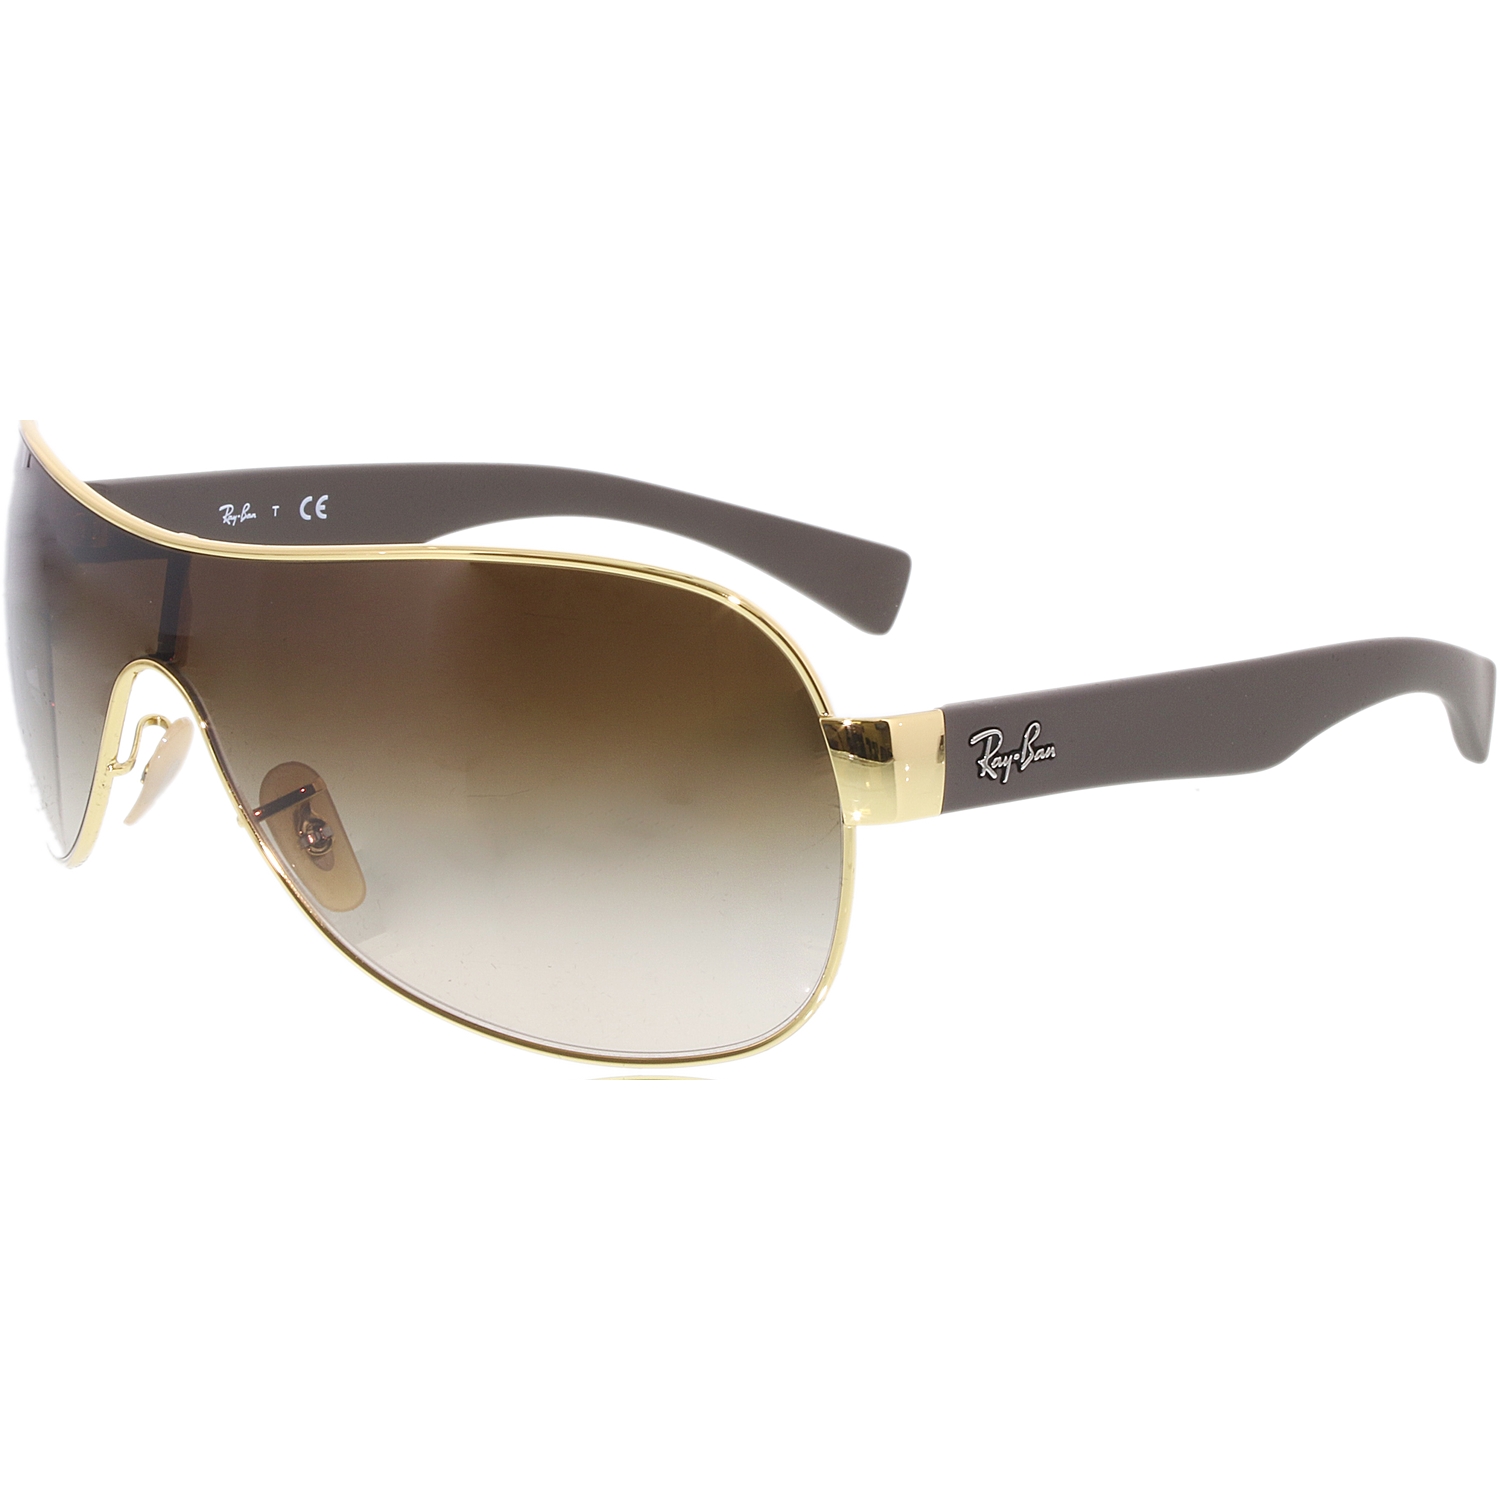 Ray-Ban Men's Gradient Highstreet RB3471-001/13-32 Gold Shield Sunglasses - image 1 of 3